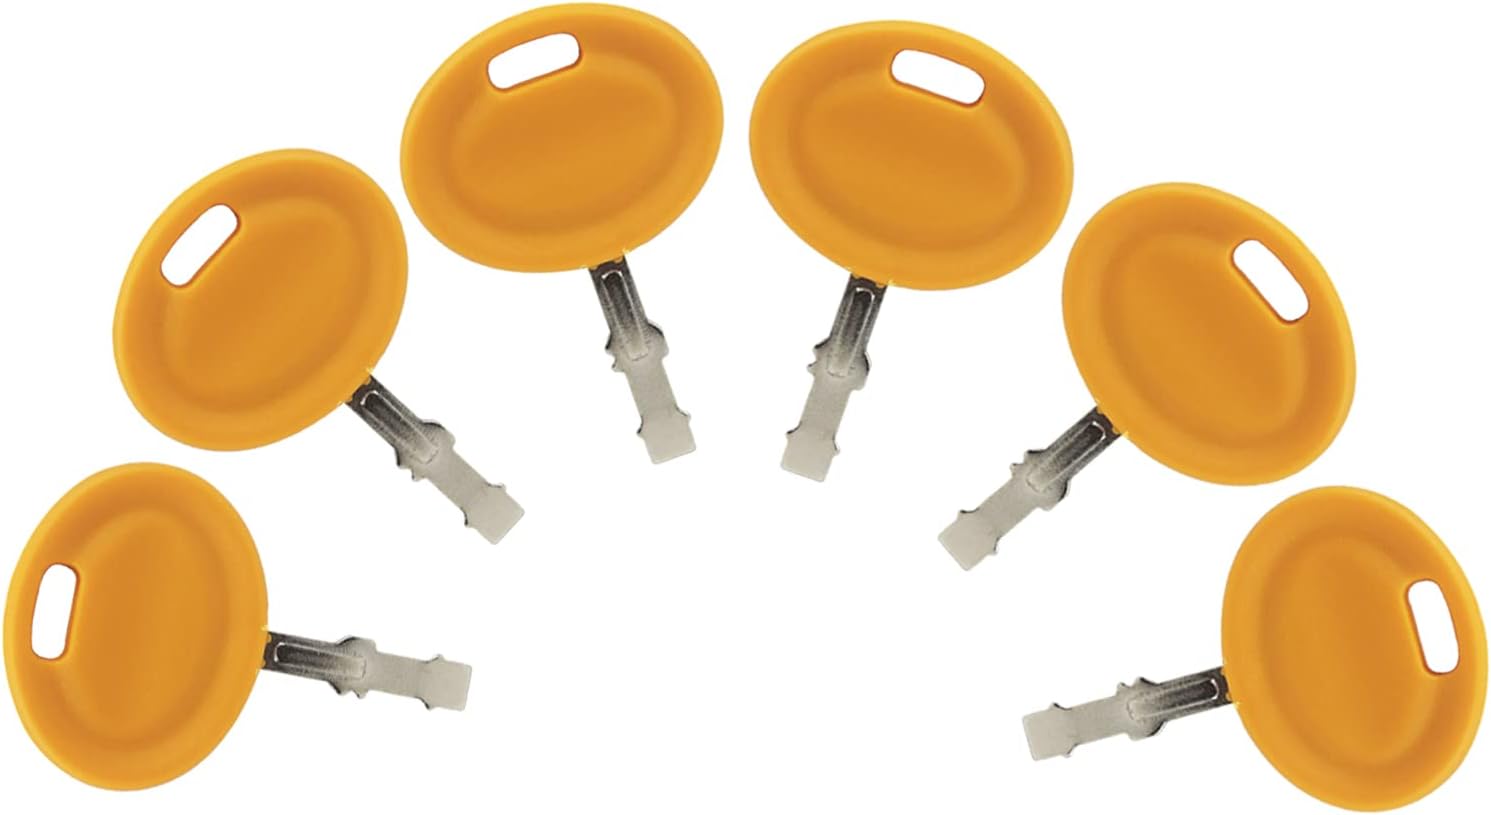 Gradora 6PCS Ignition Keys Replacement: A Reliable Solution for Lawn Mower Owners